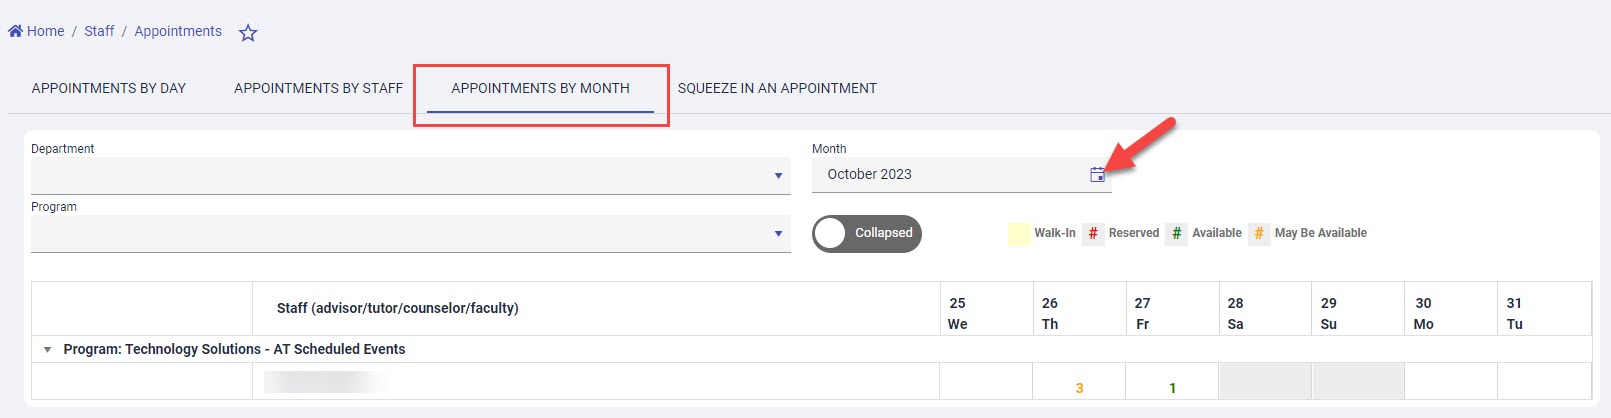 Appointments by Month tab